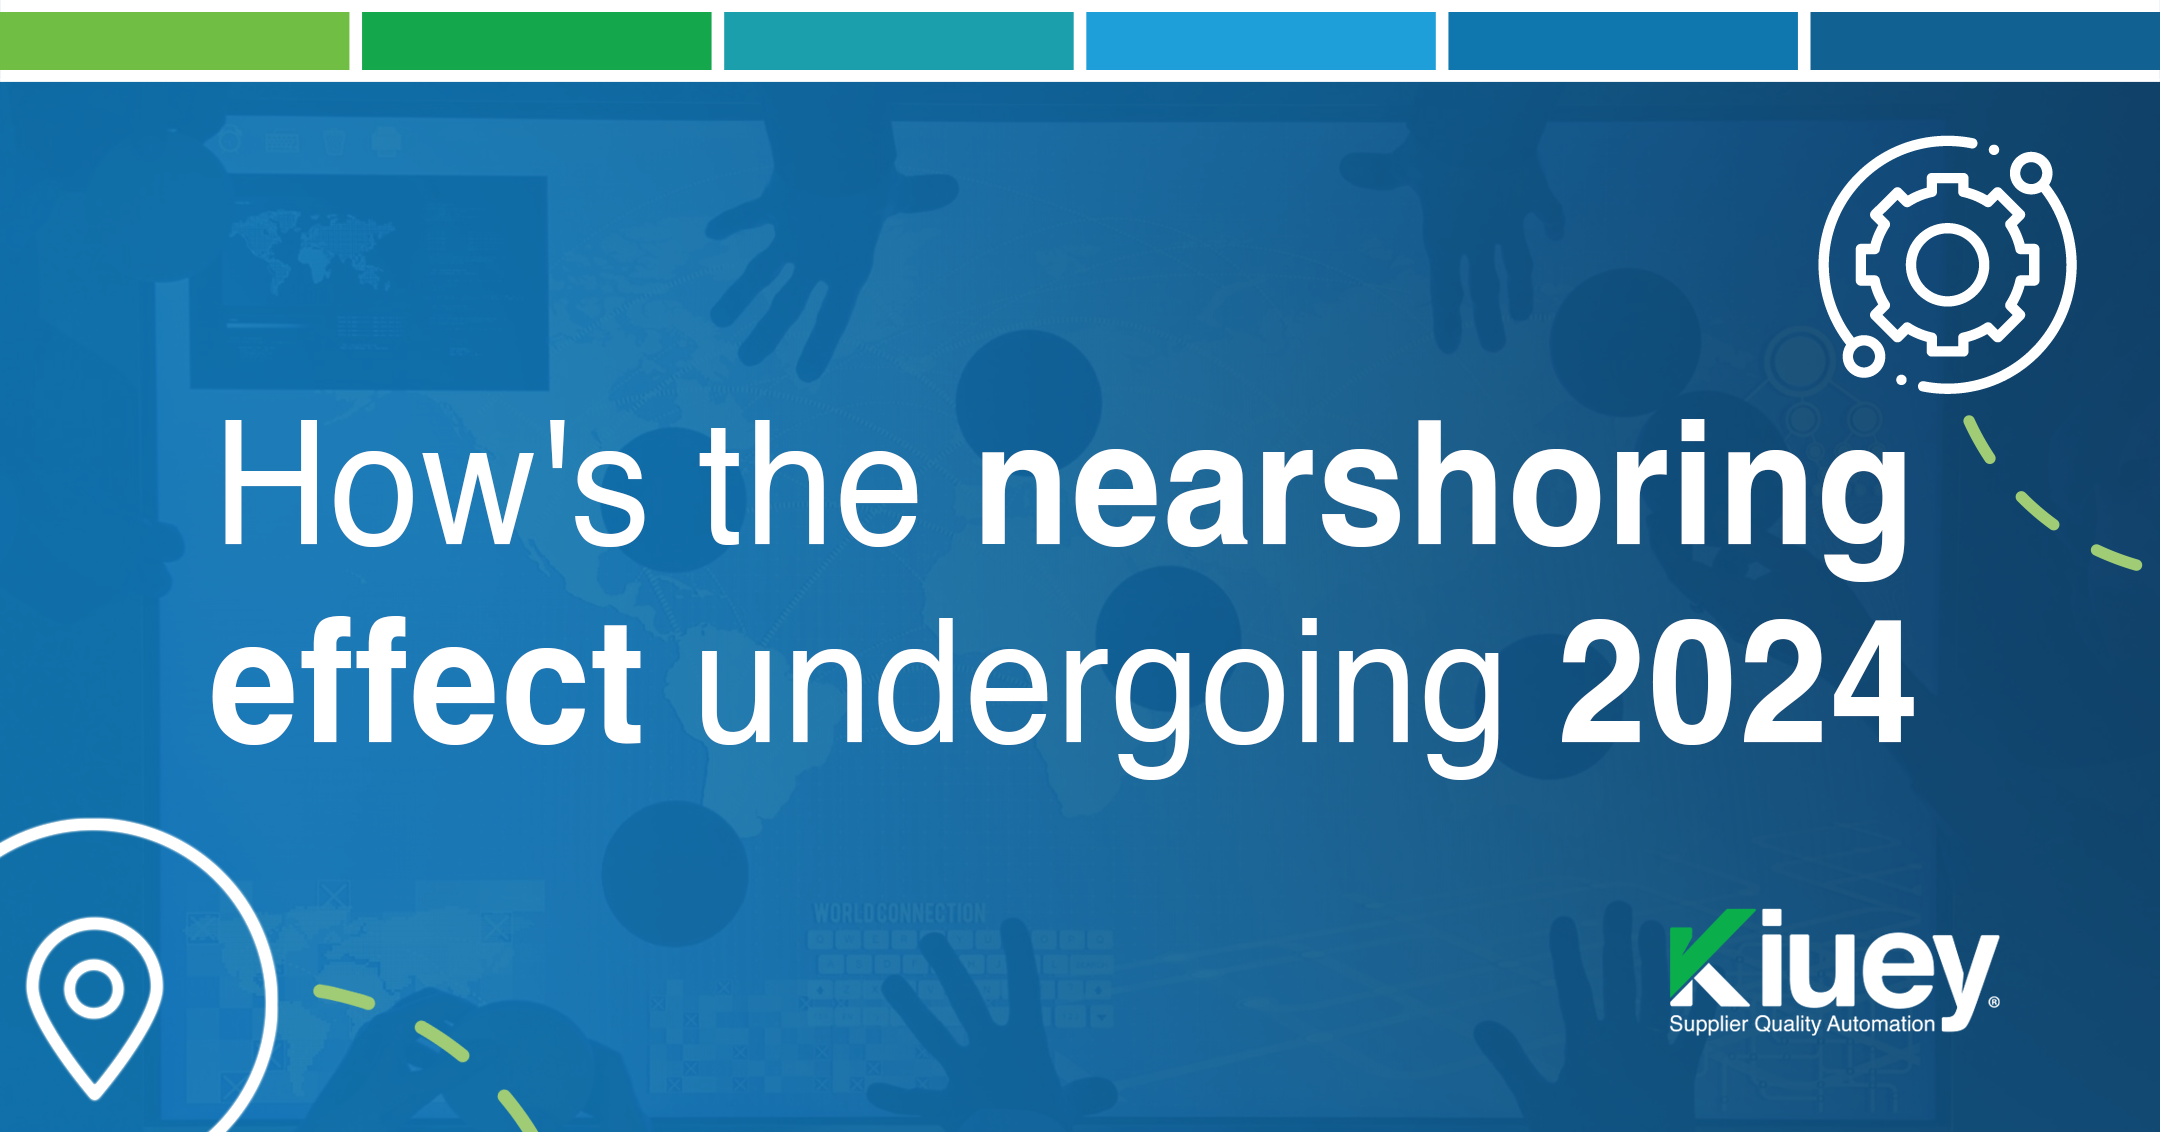 How’s the nearshoring effect undergoing 2024